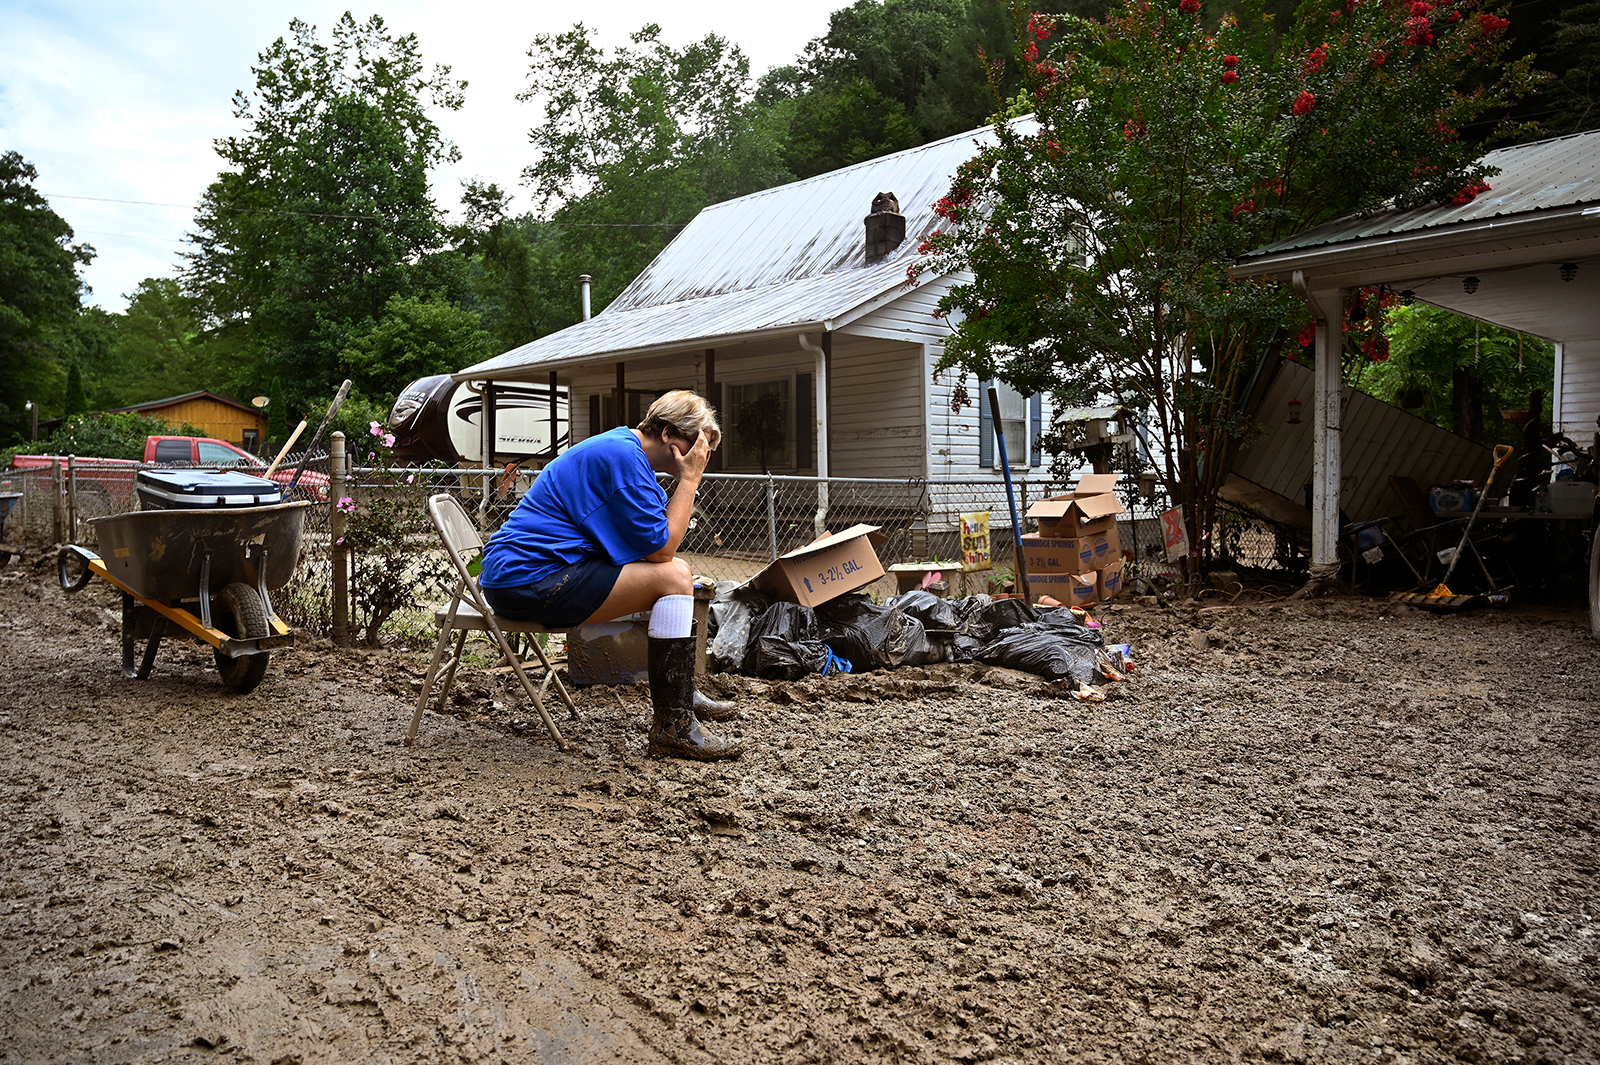 Teresa Reynolds sits exhausted as members of her community clean the debris from their flood ravaged homes at Ogden Hollar in Hindman, Ky., on Saturday, July 30.